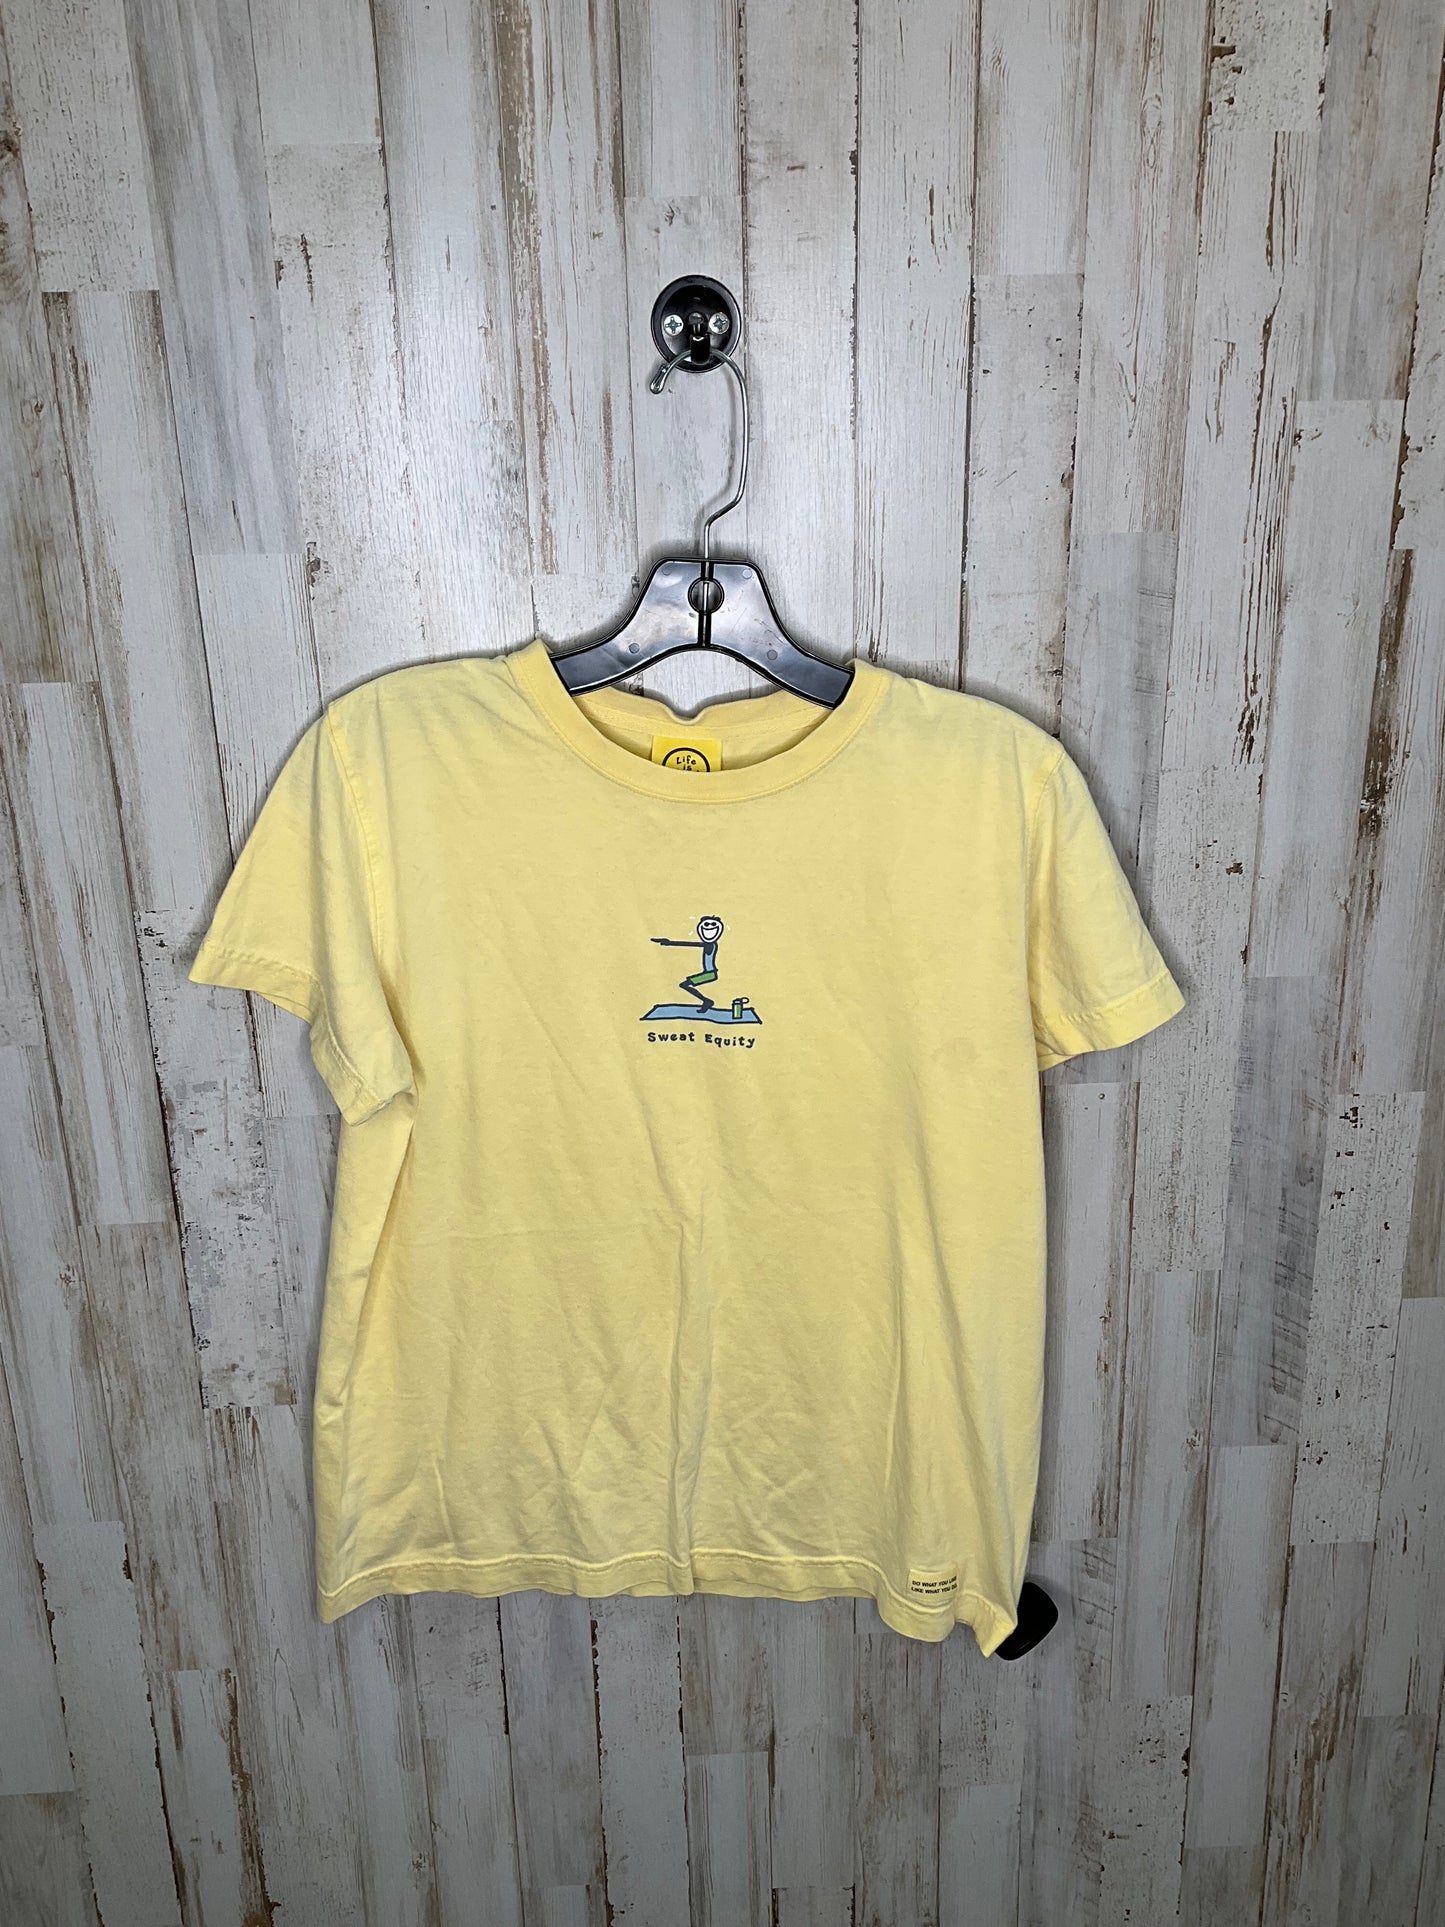 Yellow Top Short Sleeve Life Is Good, Size S